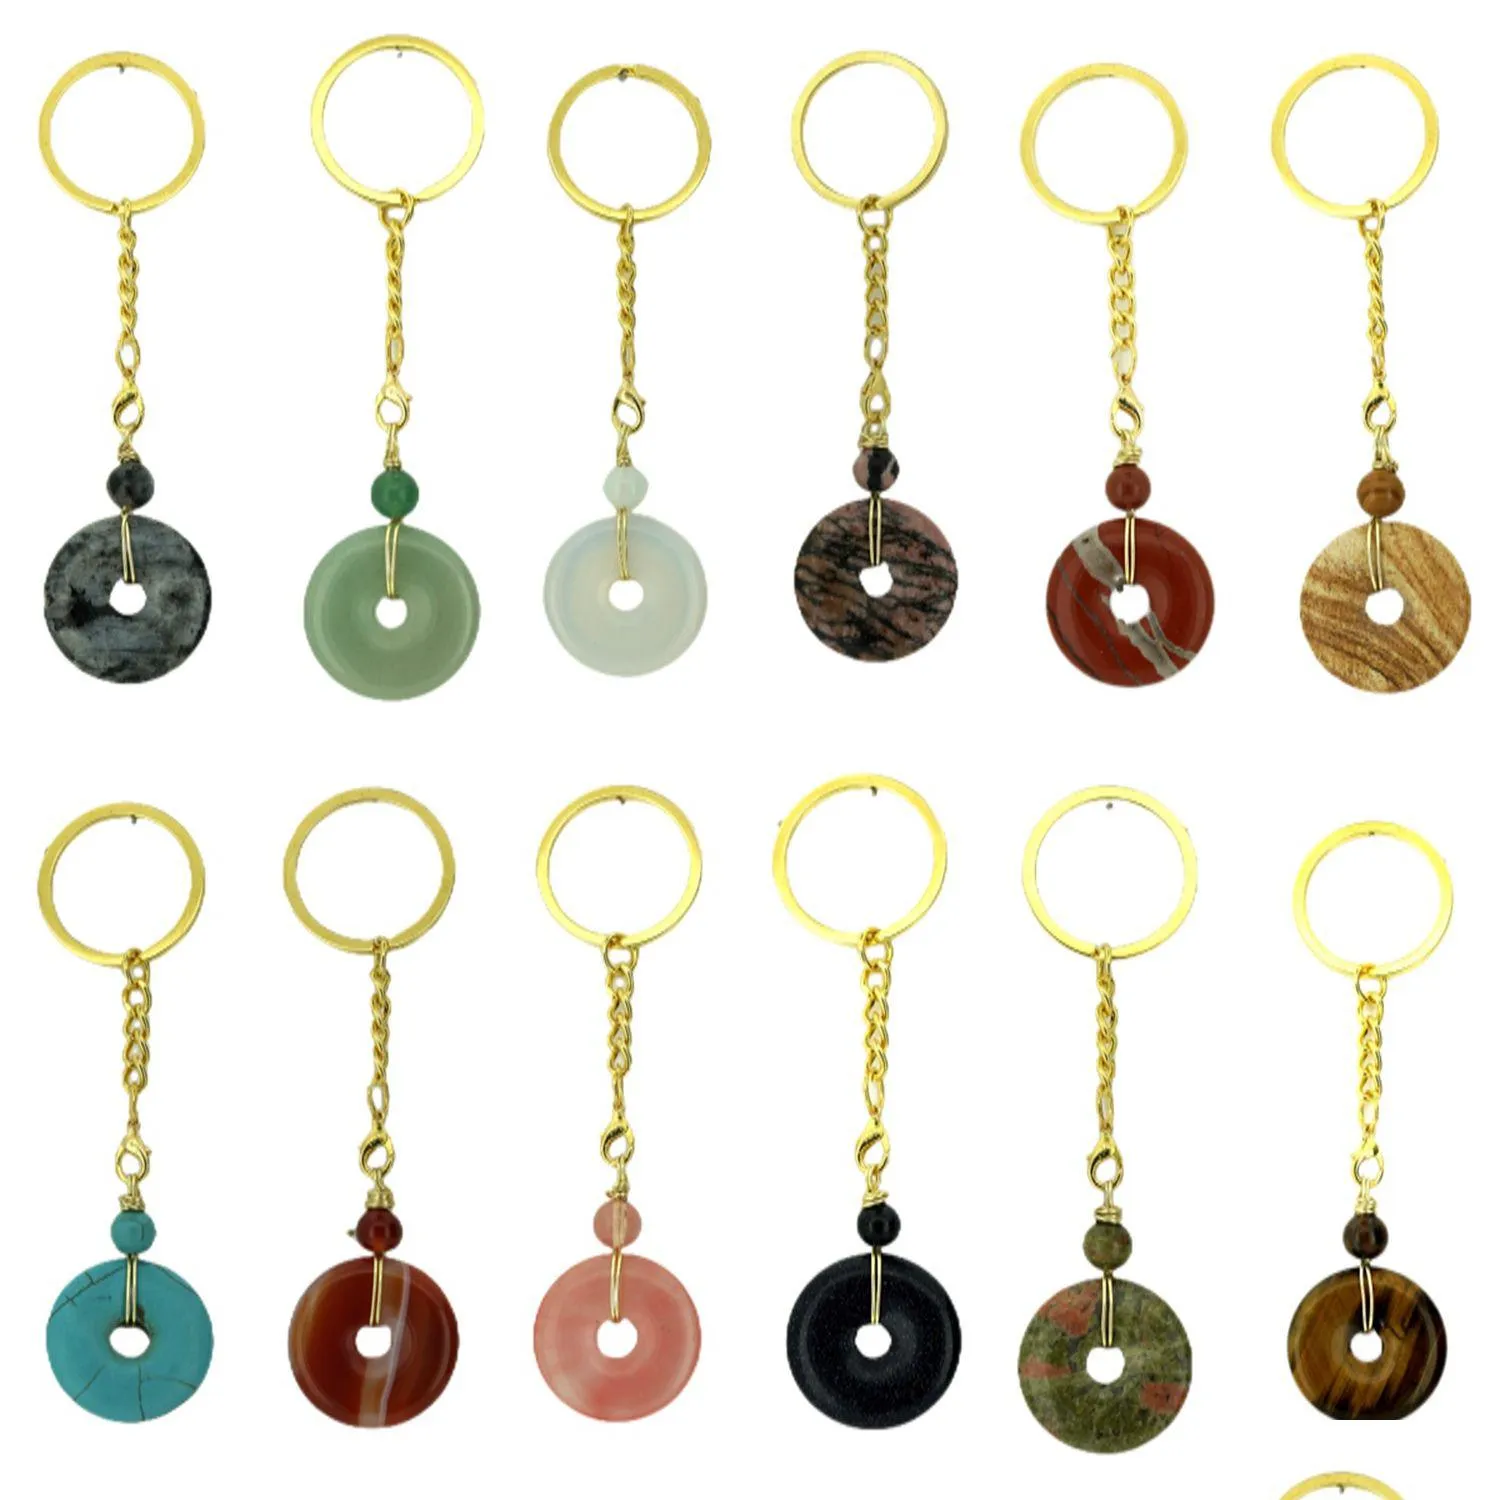 30mm smooth donuts shape gemstone pendant keychain various natural gemstone charm pendant keychain for souvenir gifts